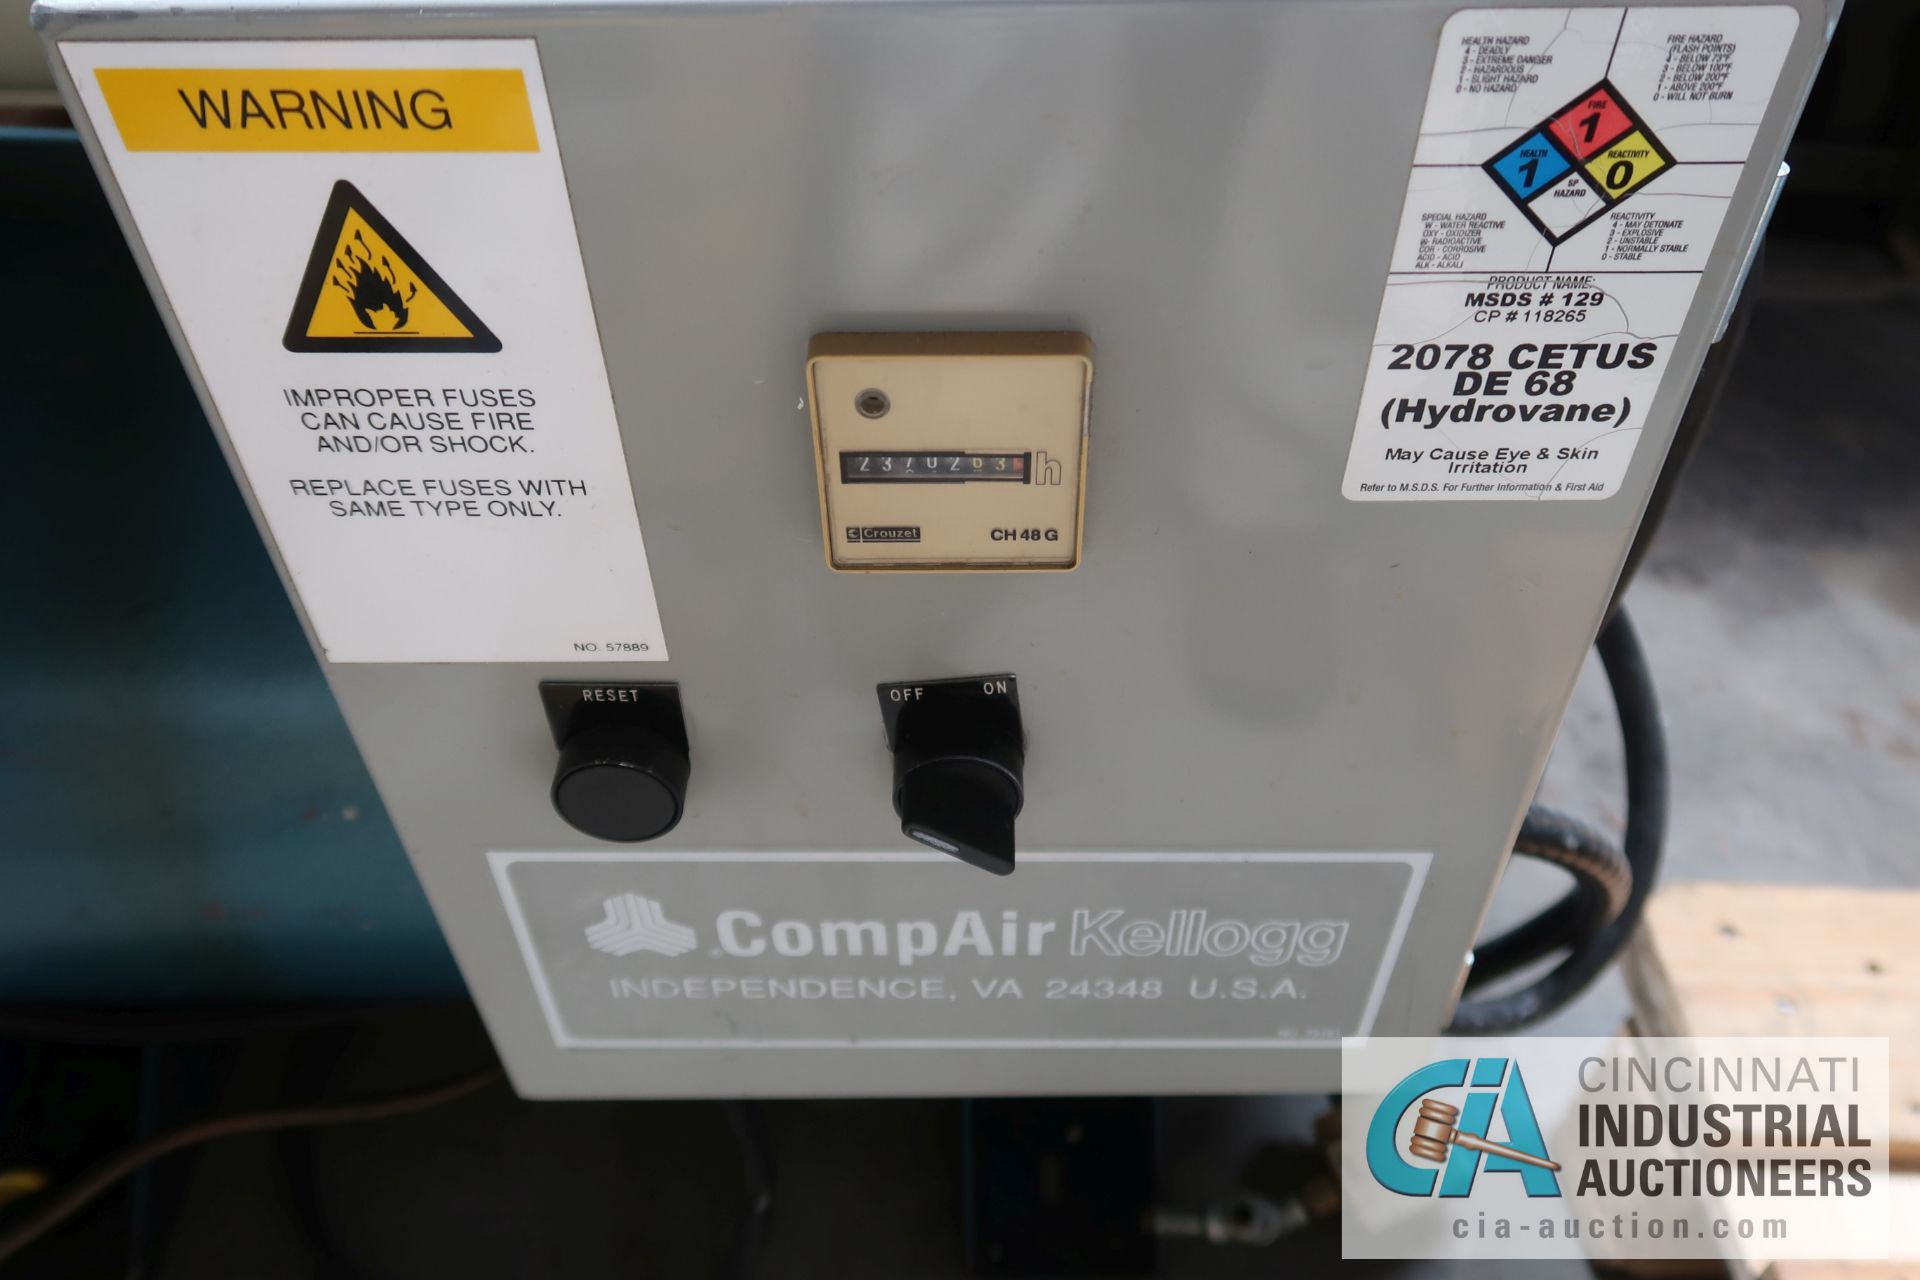 2 HP COMPAIR MODEL 10 PURS HORIZONTAL TANK AIR COMPRESSOR; S/N 010-000131, 3 PHASE, 230 VOLTS, HOURS - Image 5 of 7